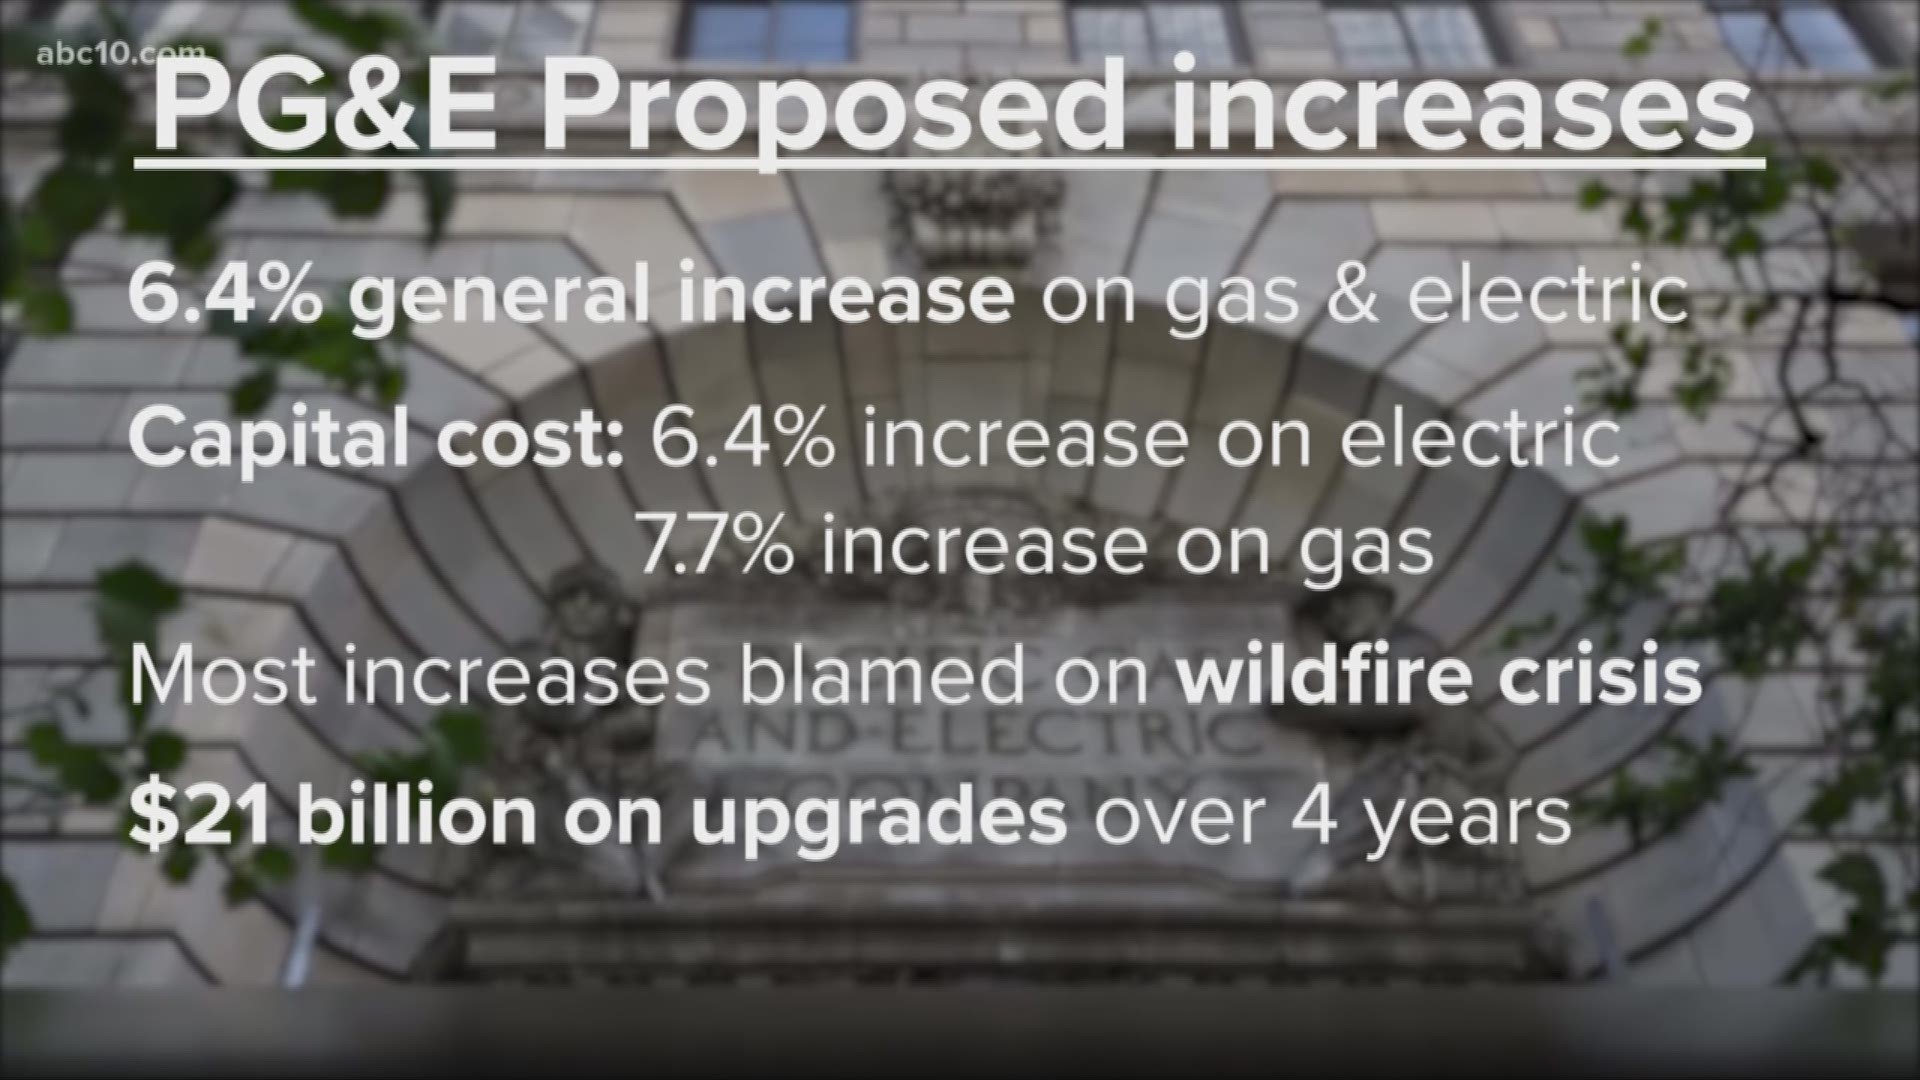 PG&E is seeking to increase its rates. ABC10's Brandon Rittiman breaks down the numbers.